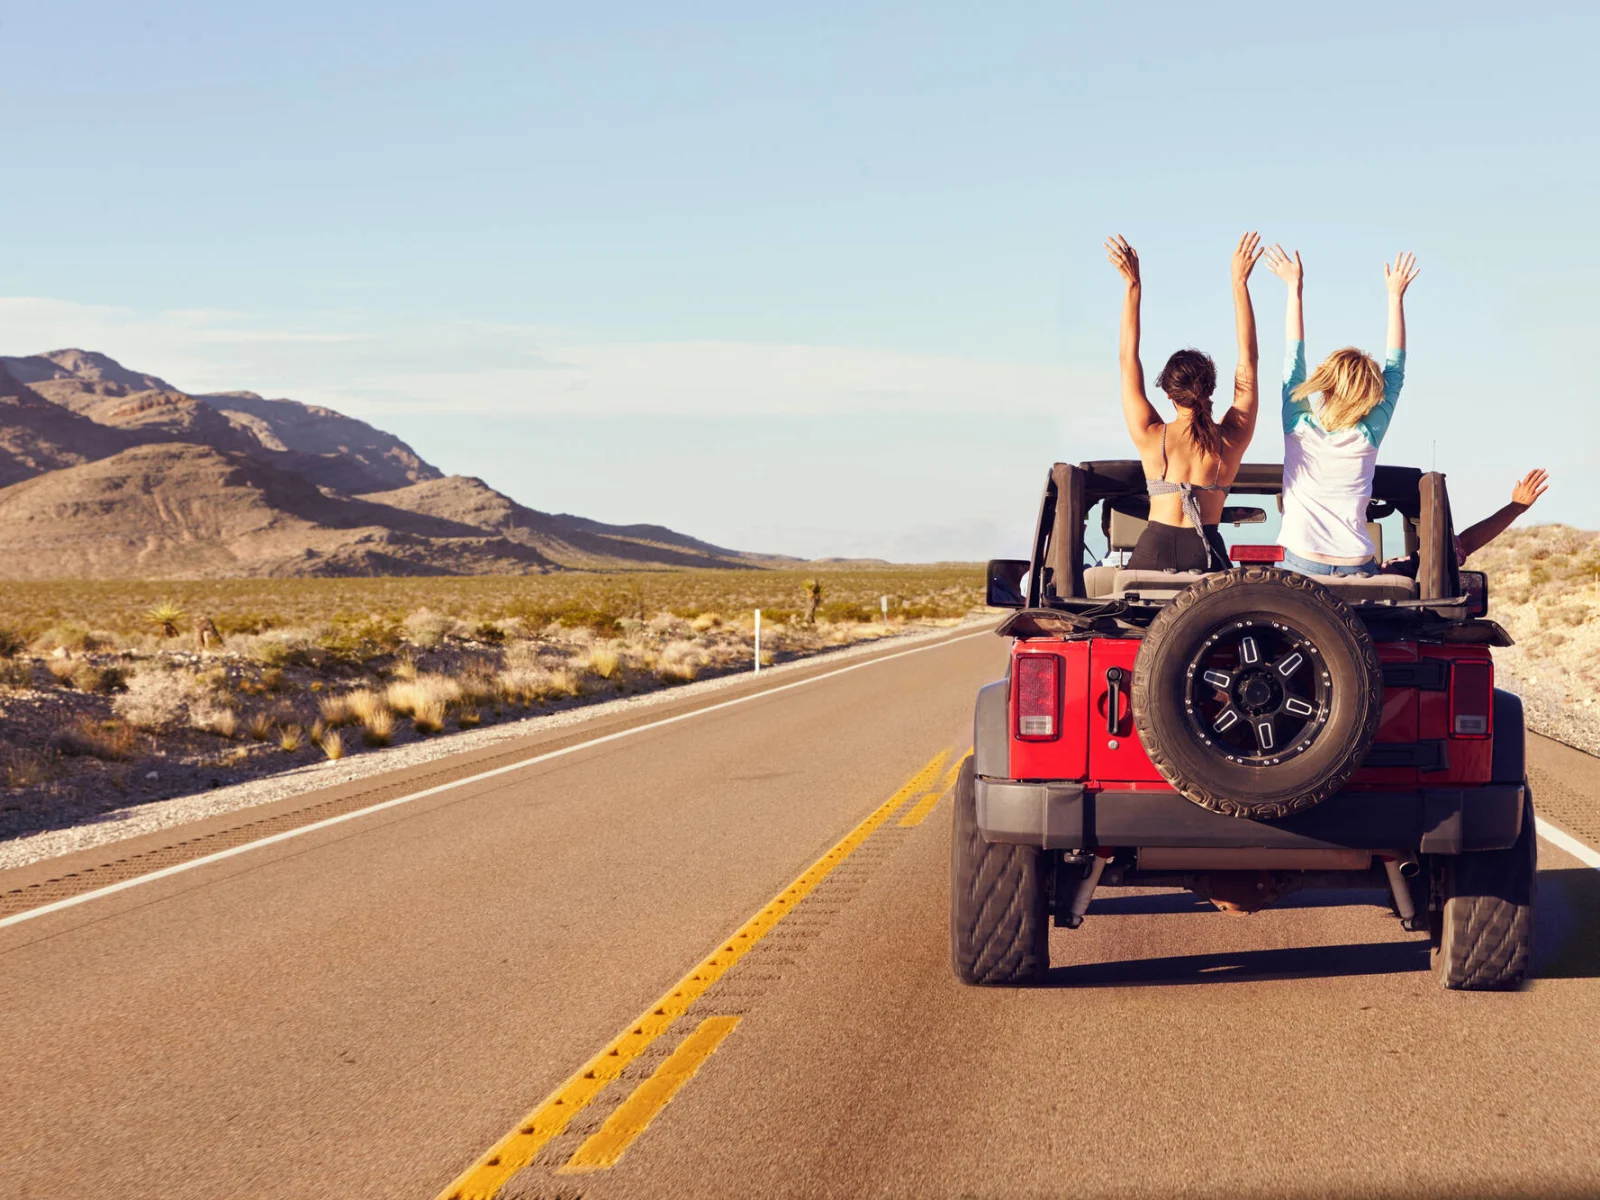 “Hit the Road: Planning the Ultimate Road Trip Adventure”